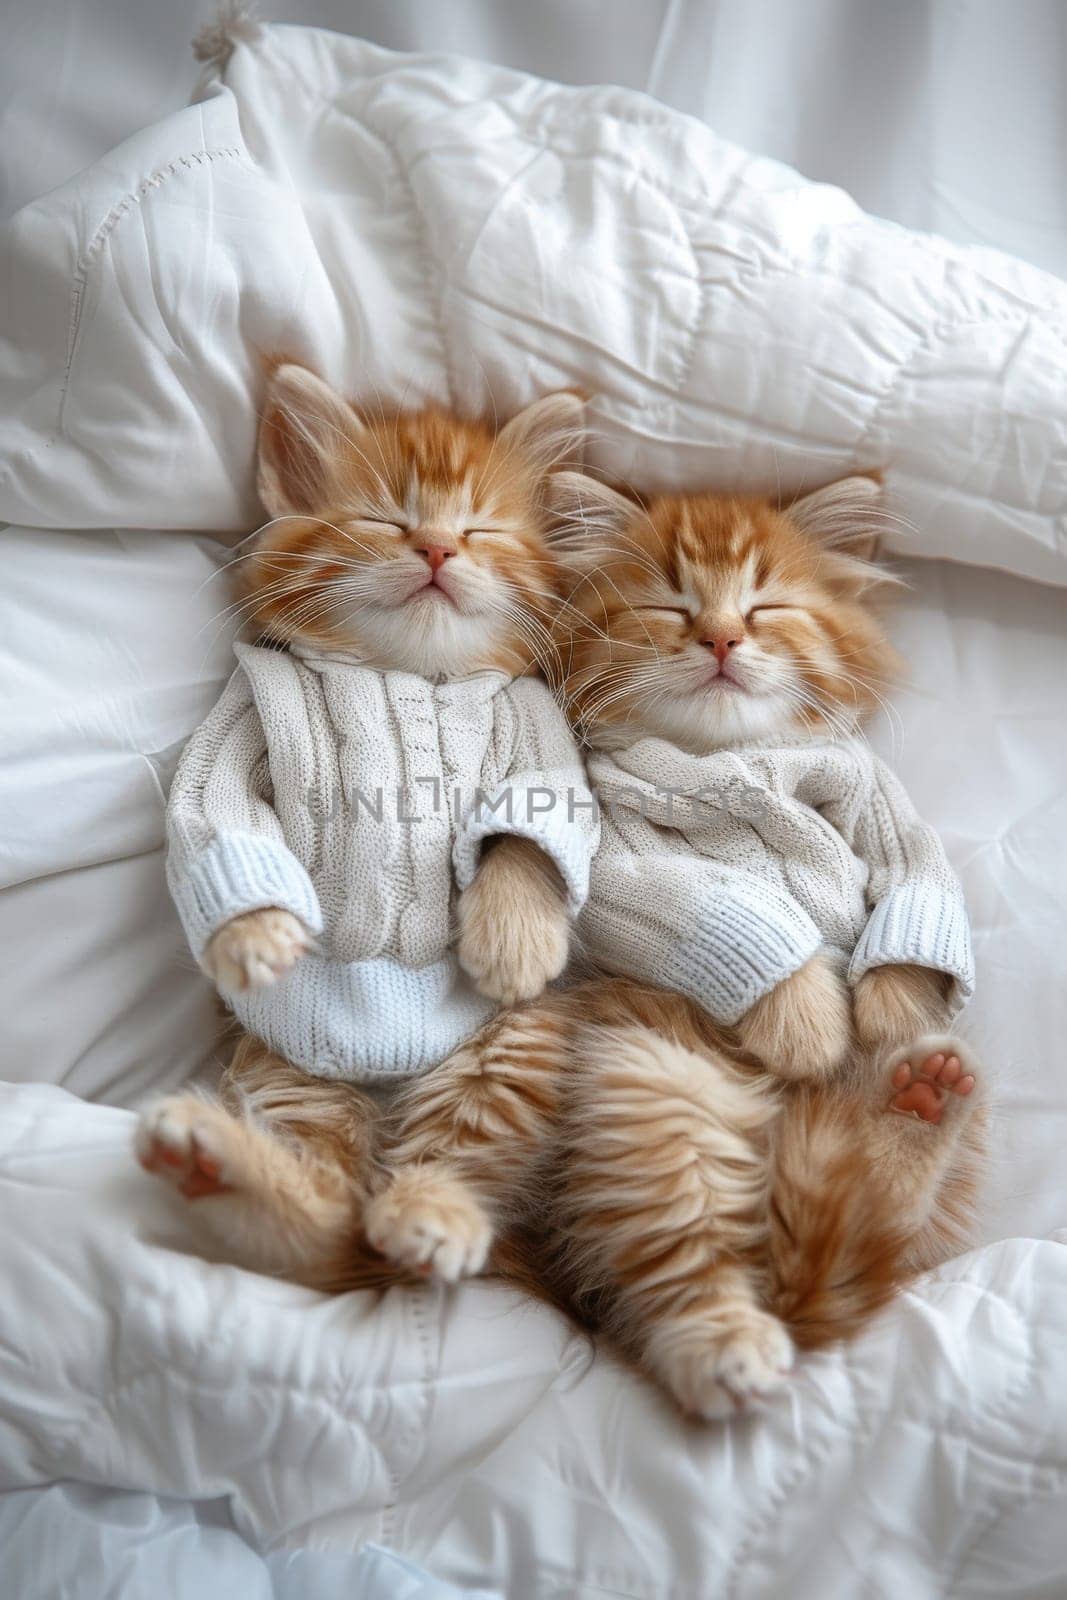 Two orange kittens are sleeping on a bed with a blue blanket. One of the kittens is wearing a blue shirt